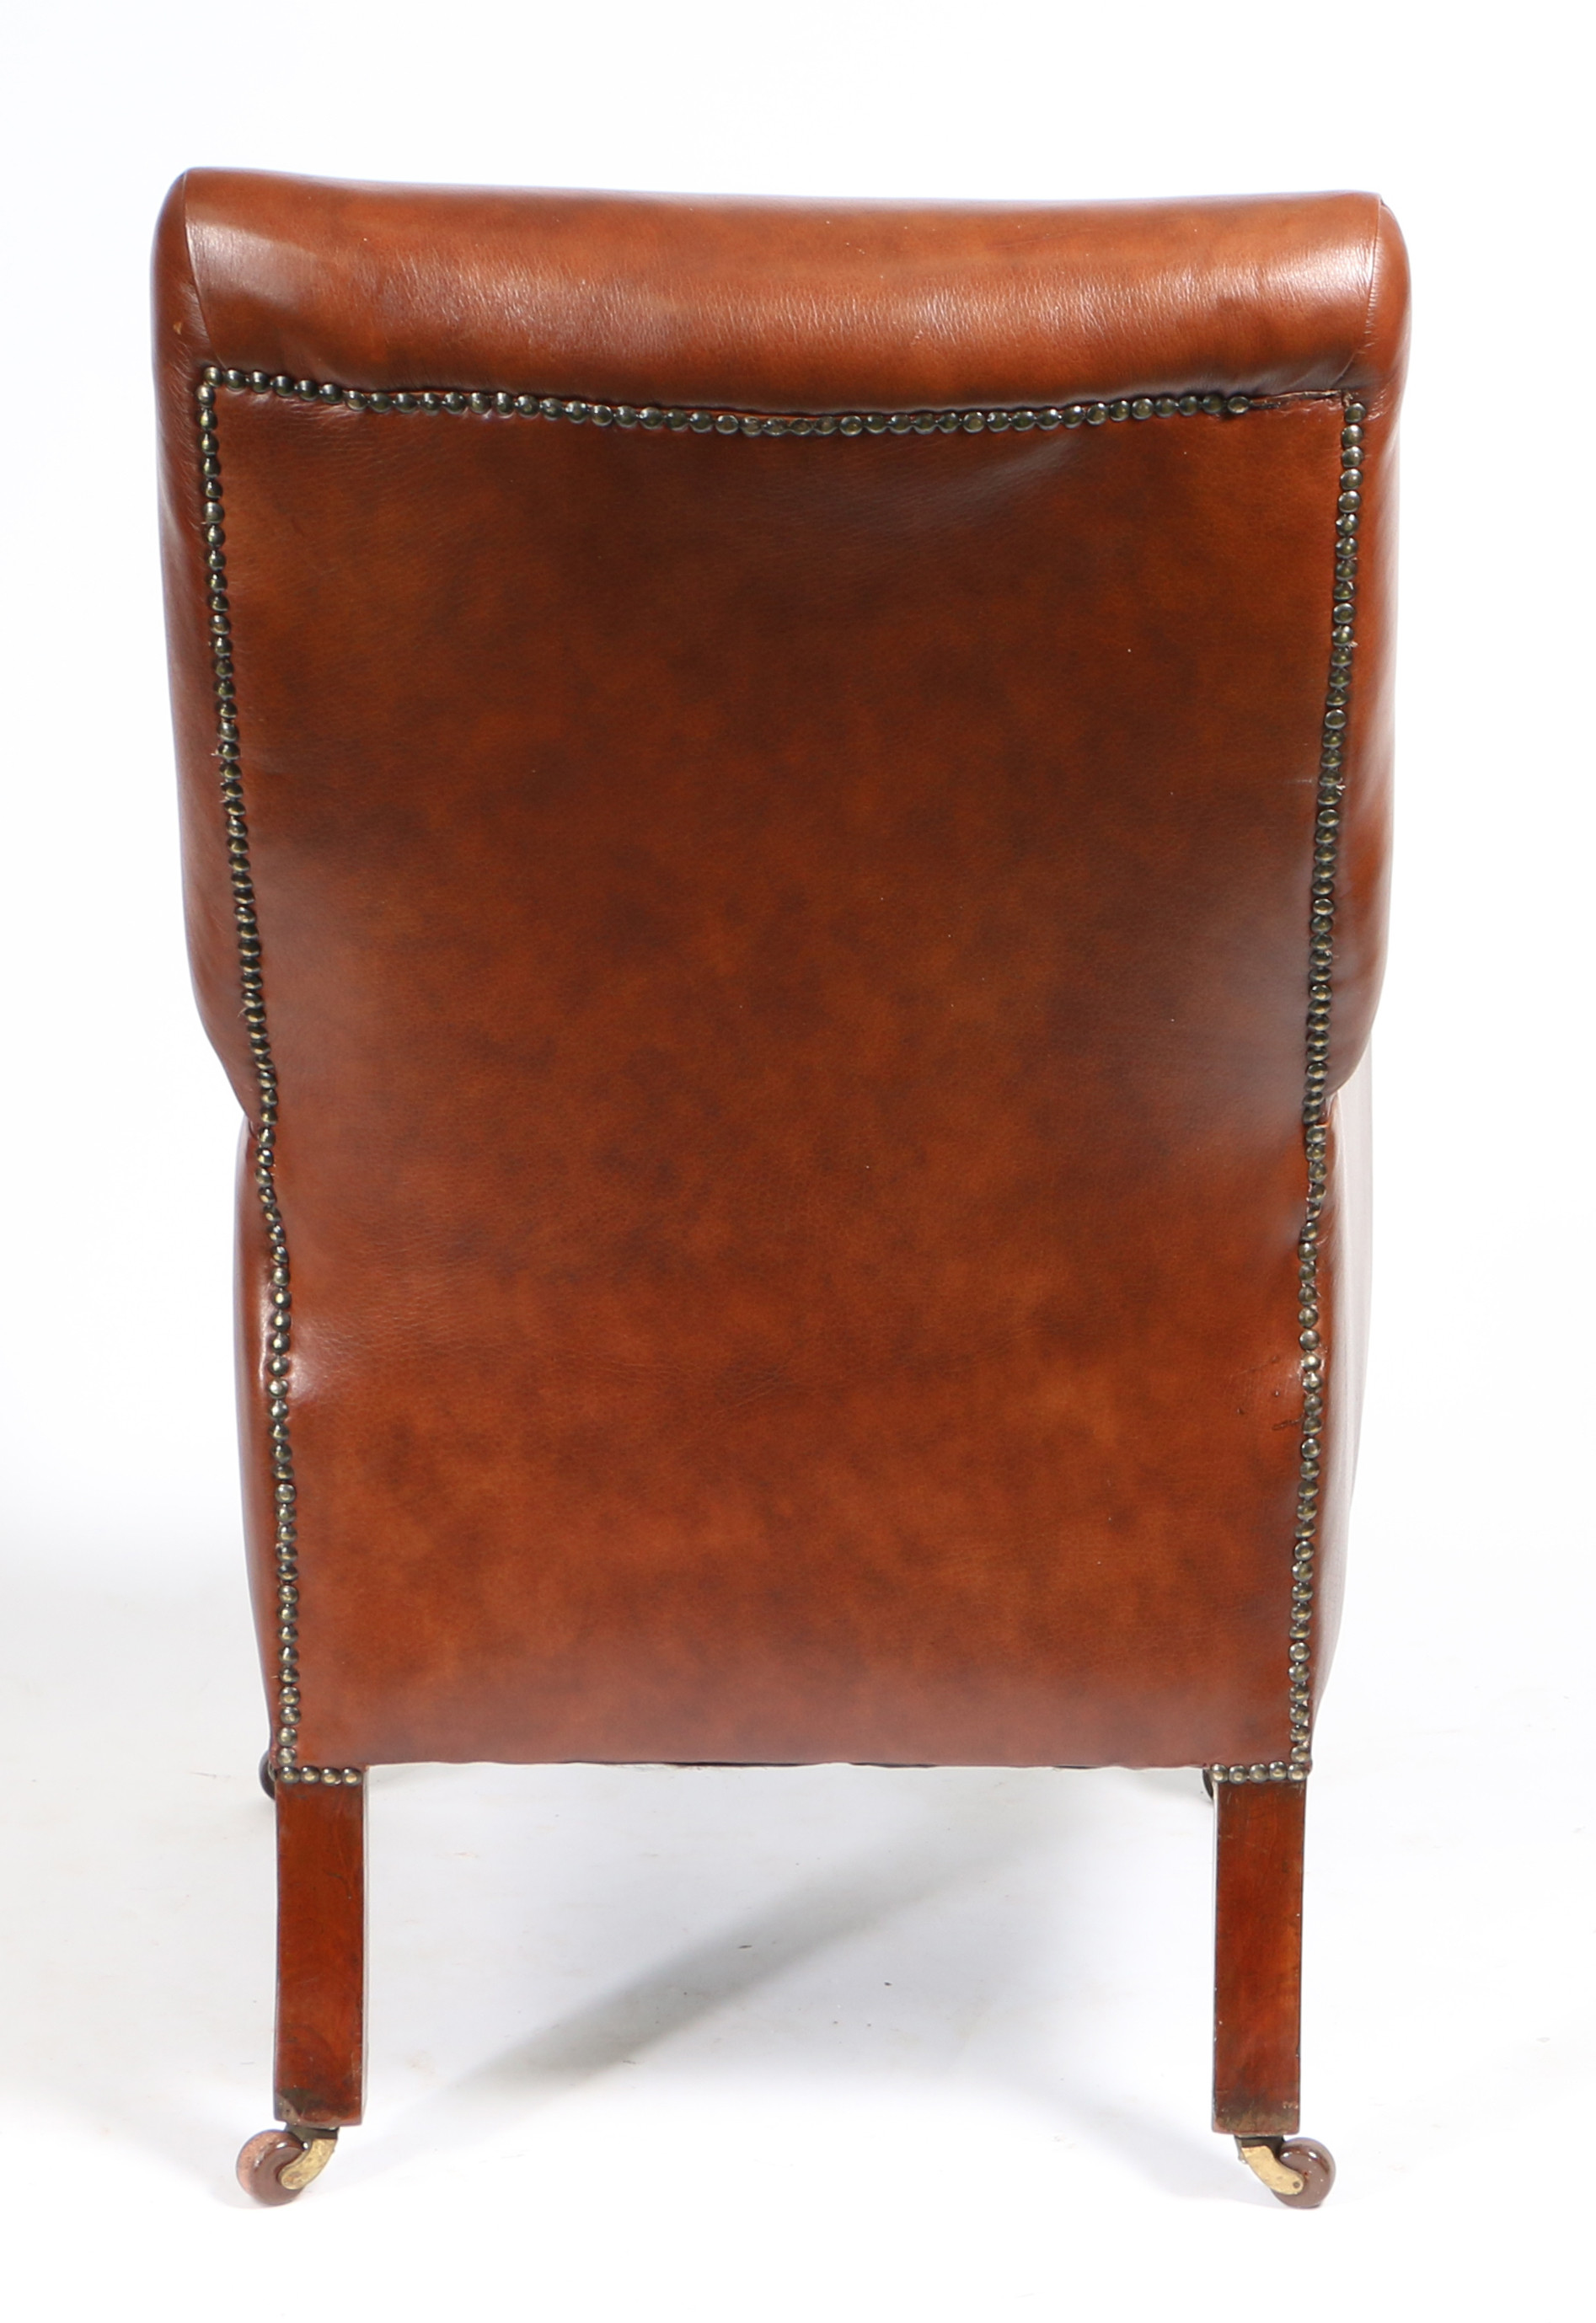 A 19TH CENTURY LEATHER UPHOLSTERED ARMCHAIR. - Image 4 of 4